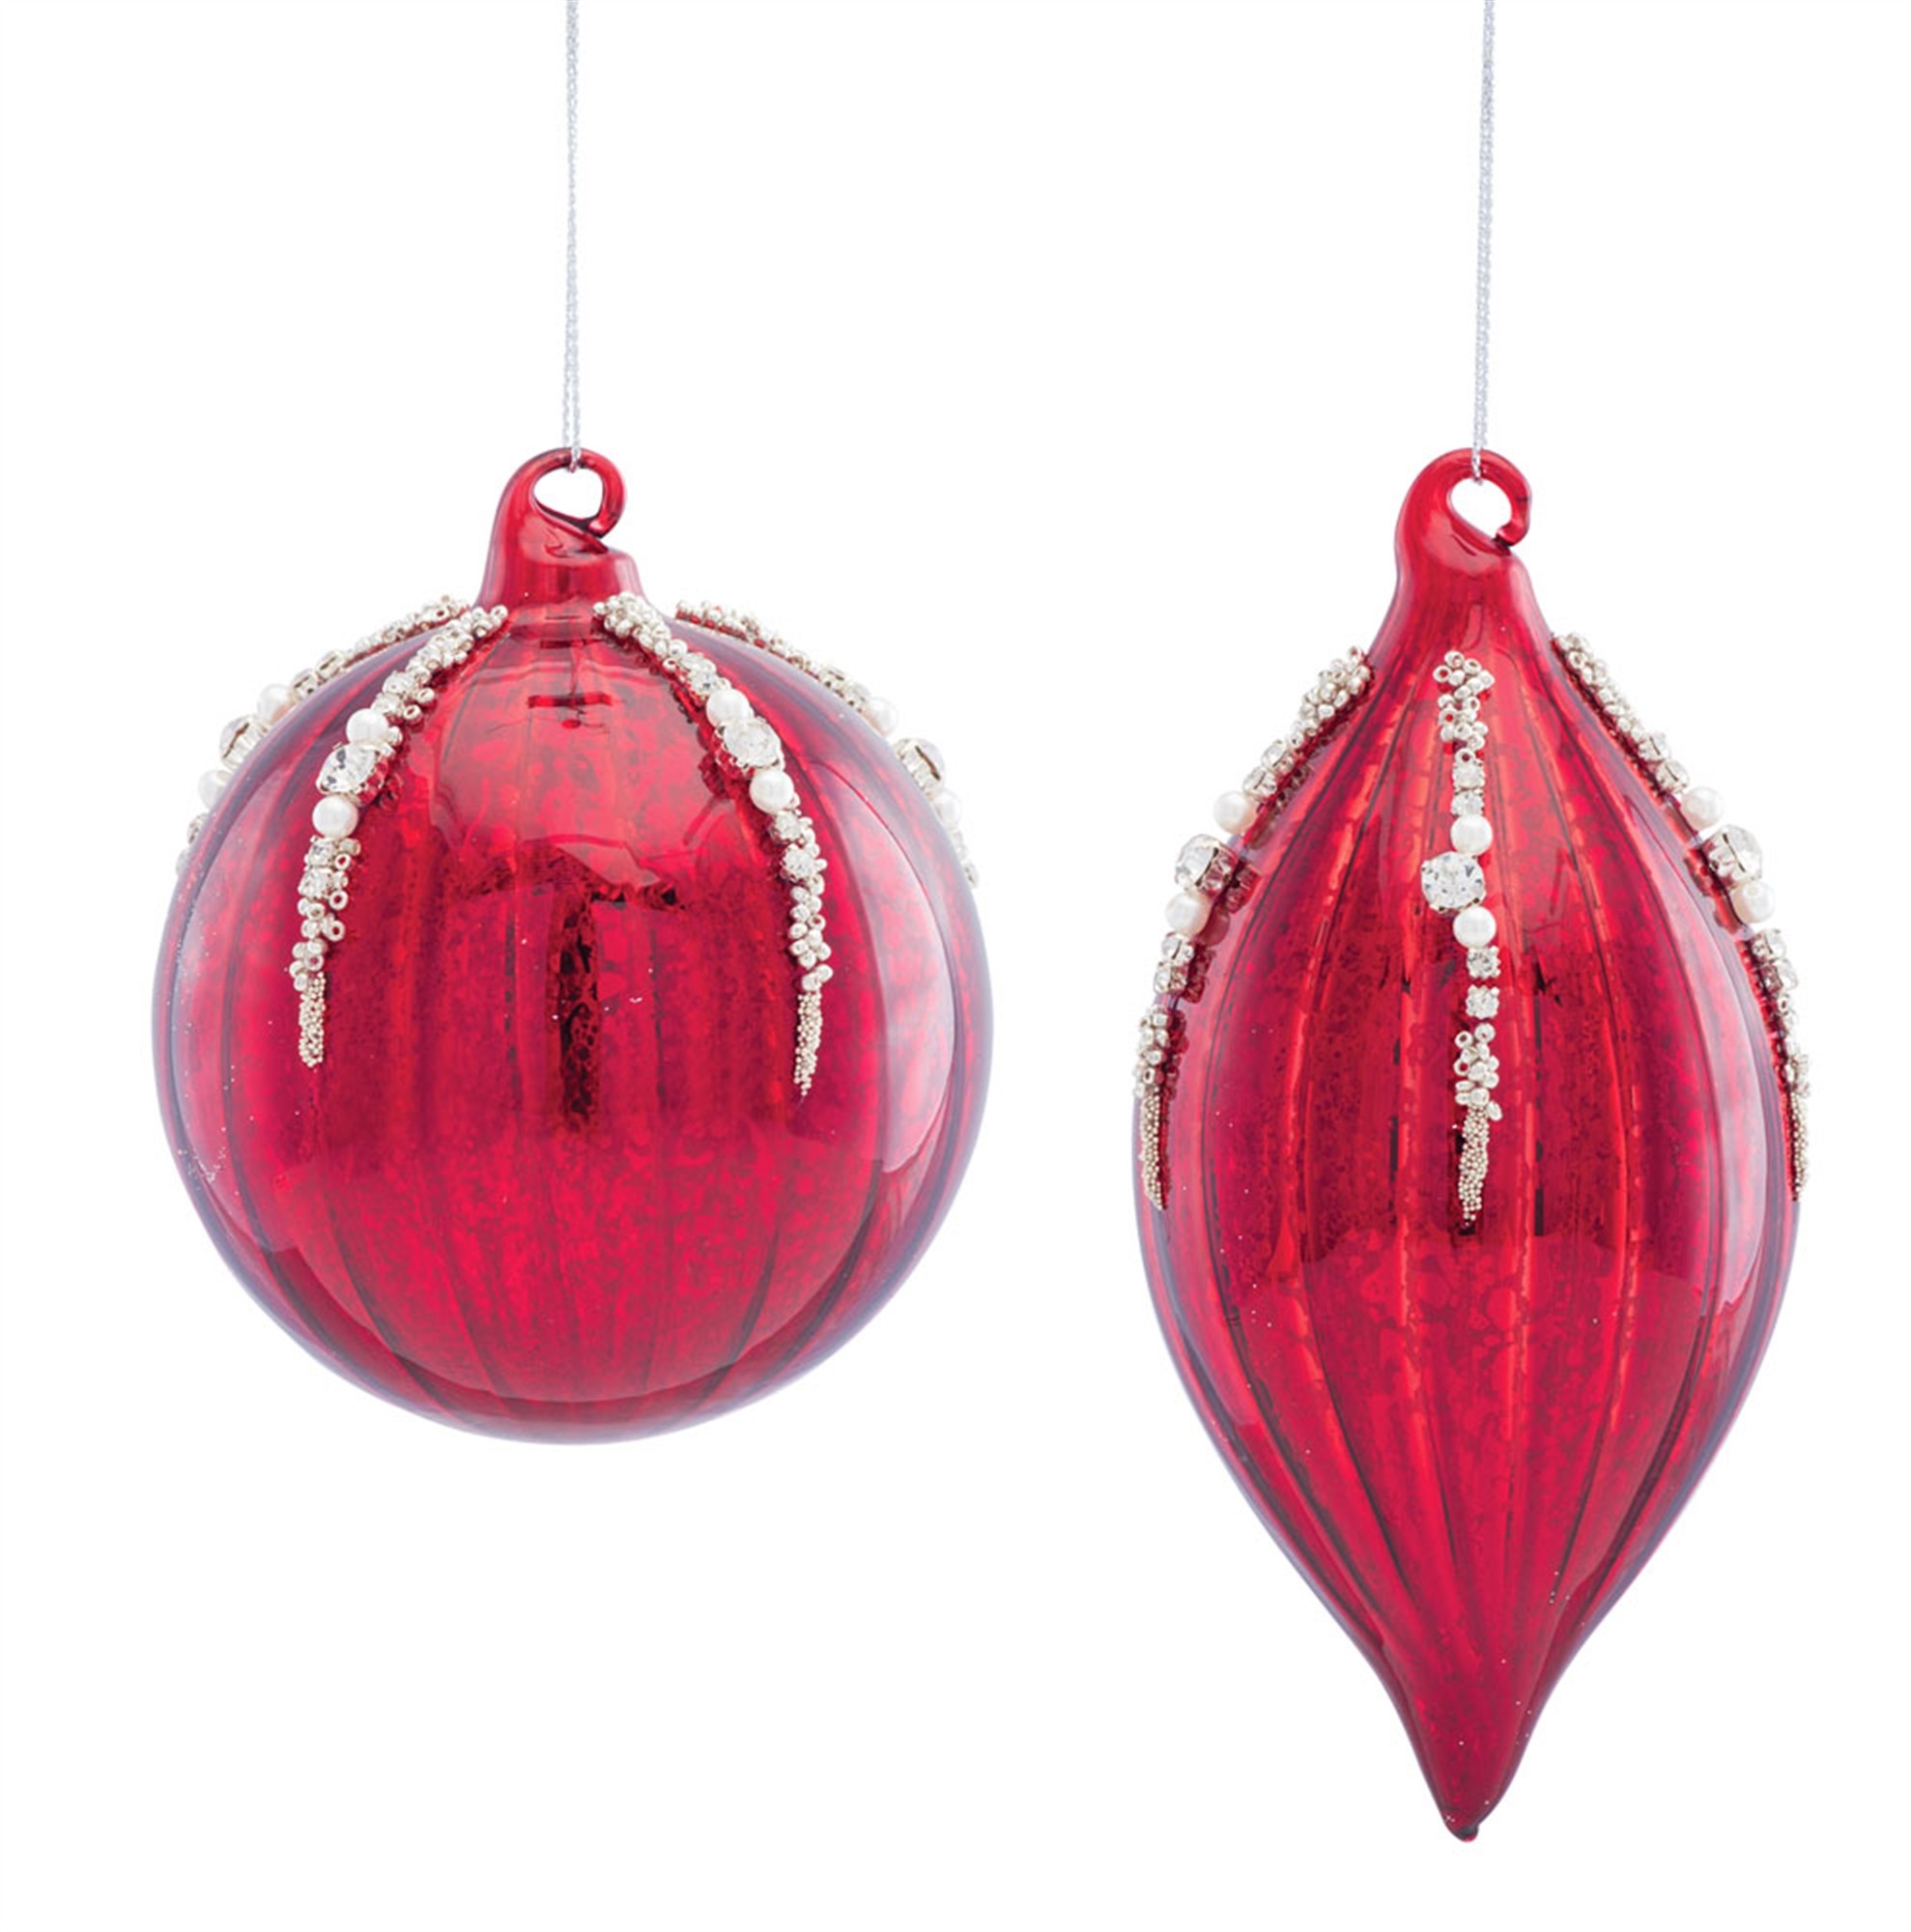 Beaded Ornament (Set of 4) 4.75"H, 6.5"H Glass